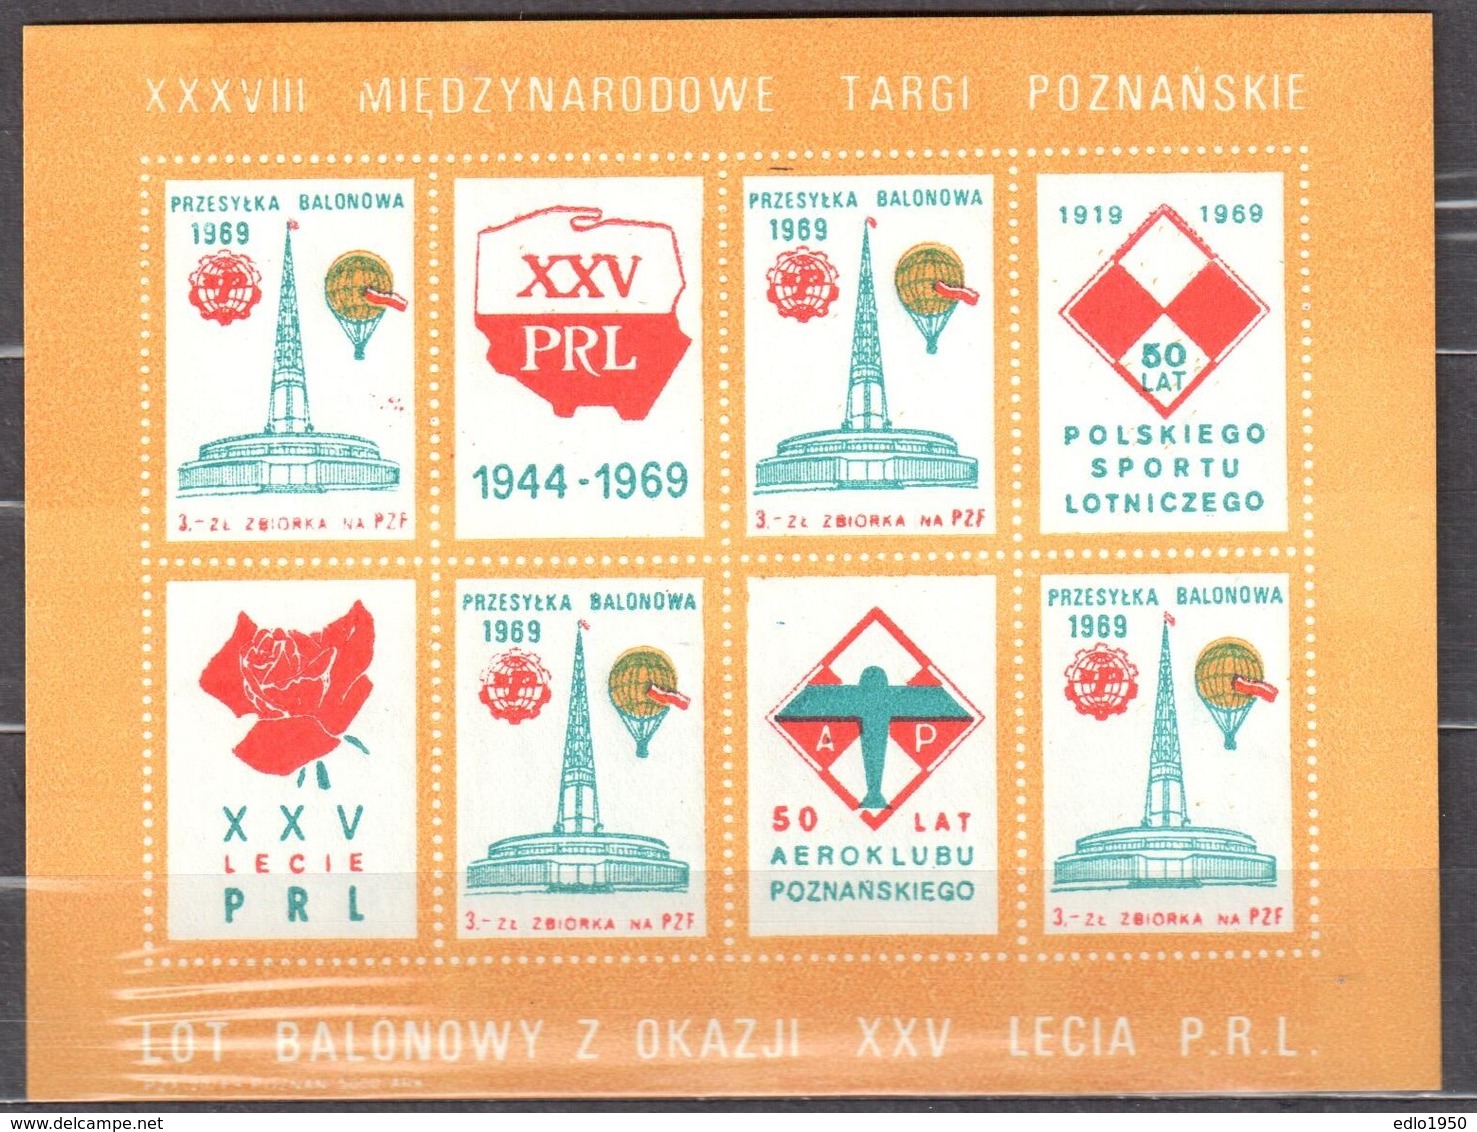 Poland-1969-balloon-label-sheet-MNH(**) - Unclassified